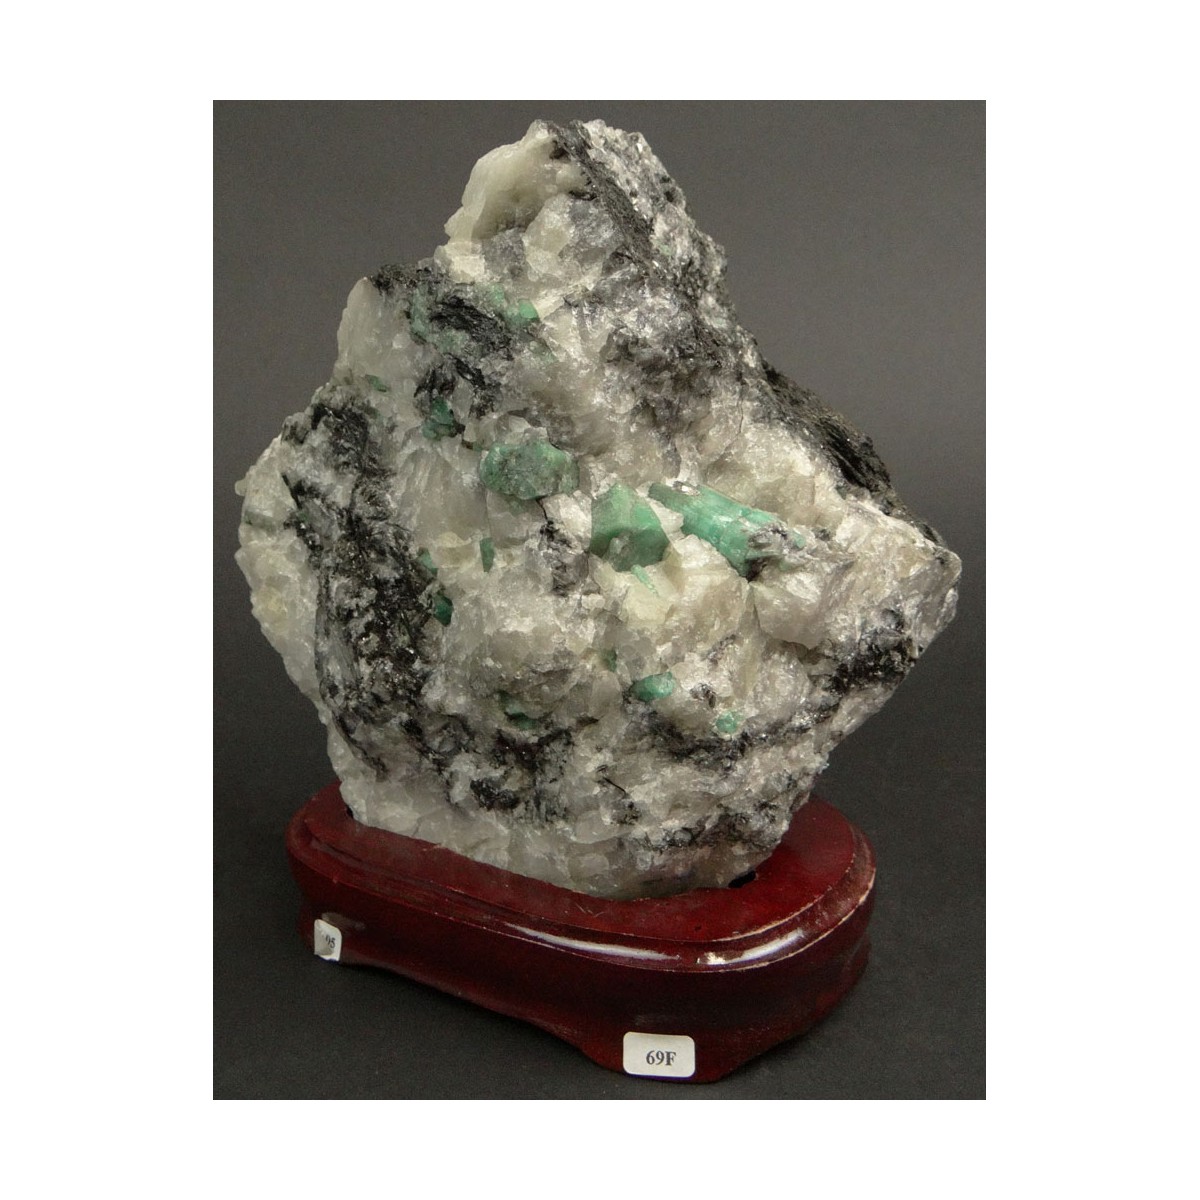 Mineral Specimen with Emeralds Mounted on Wooden Base. Measures 6-7/8 Inches by 6-1/2 Inches. Measu